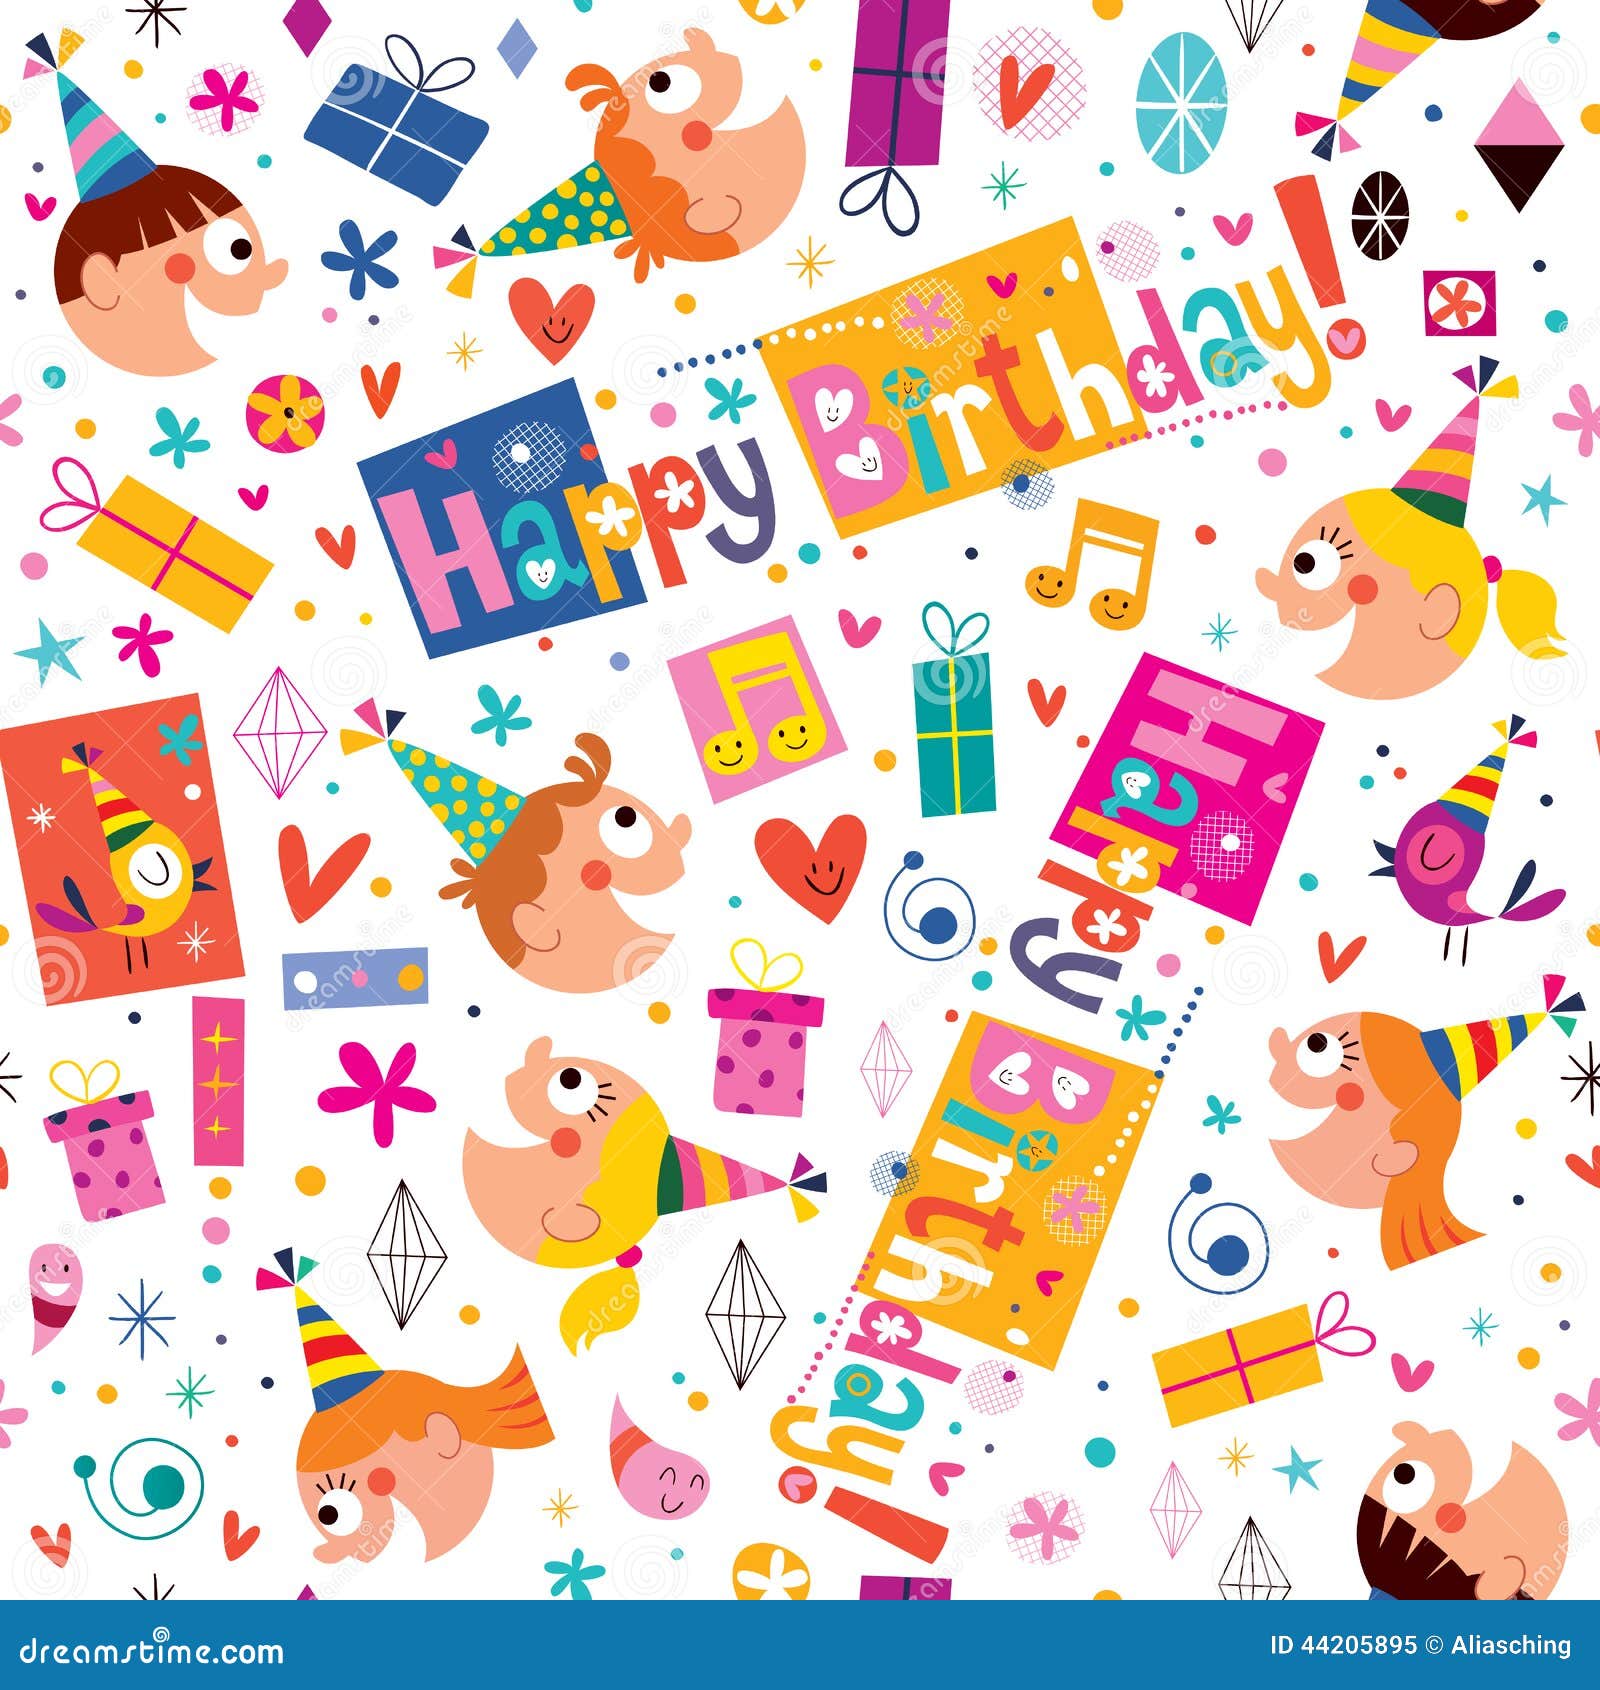 30 New and exclusive HD Birthday wishes Images - Happy Birthday to you! -  Happy Birthday wishes!